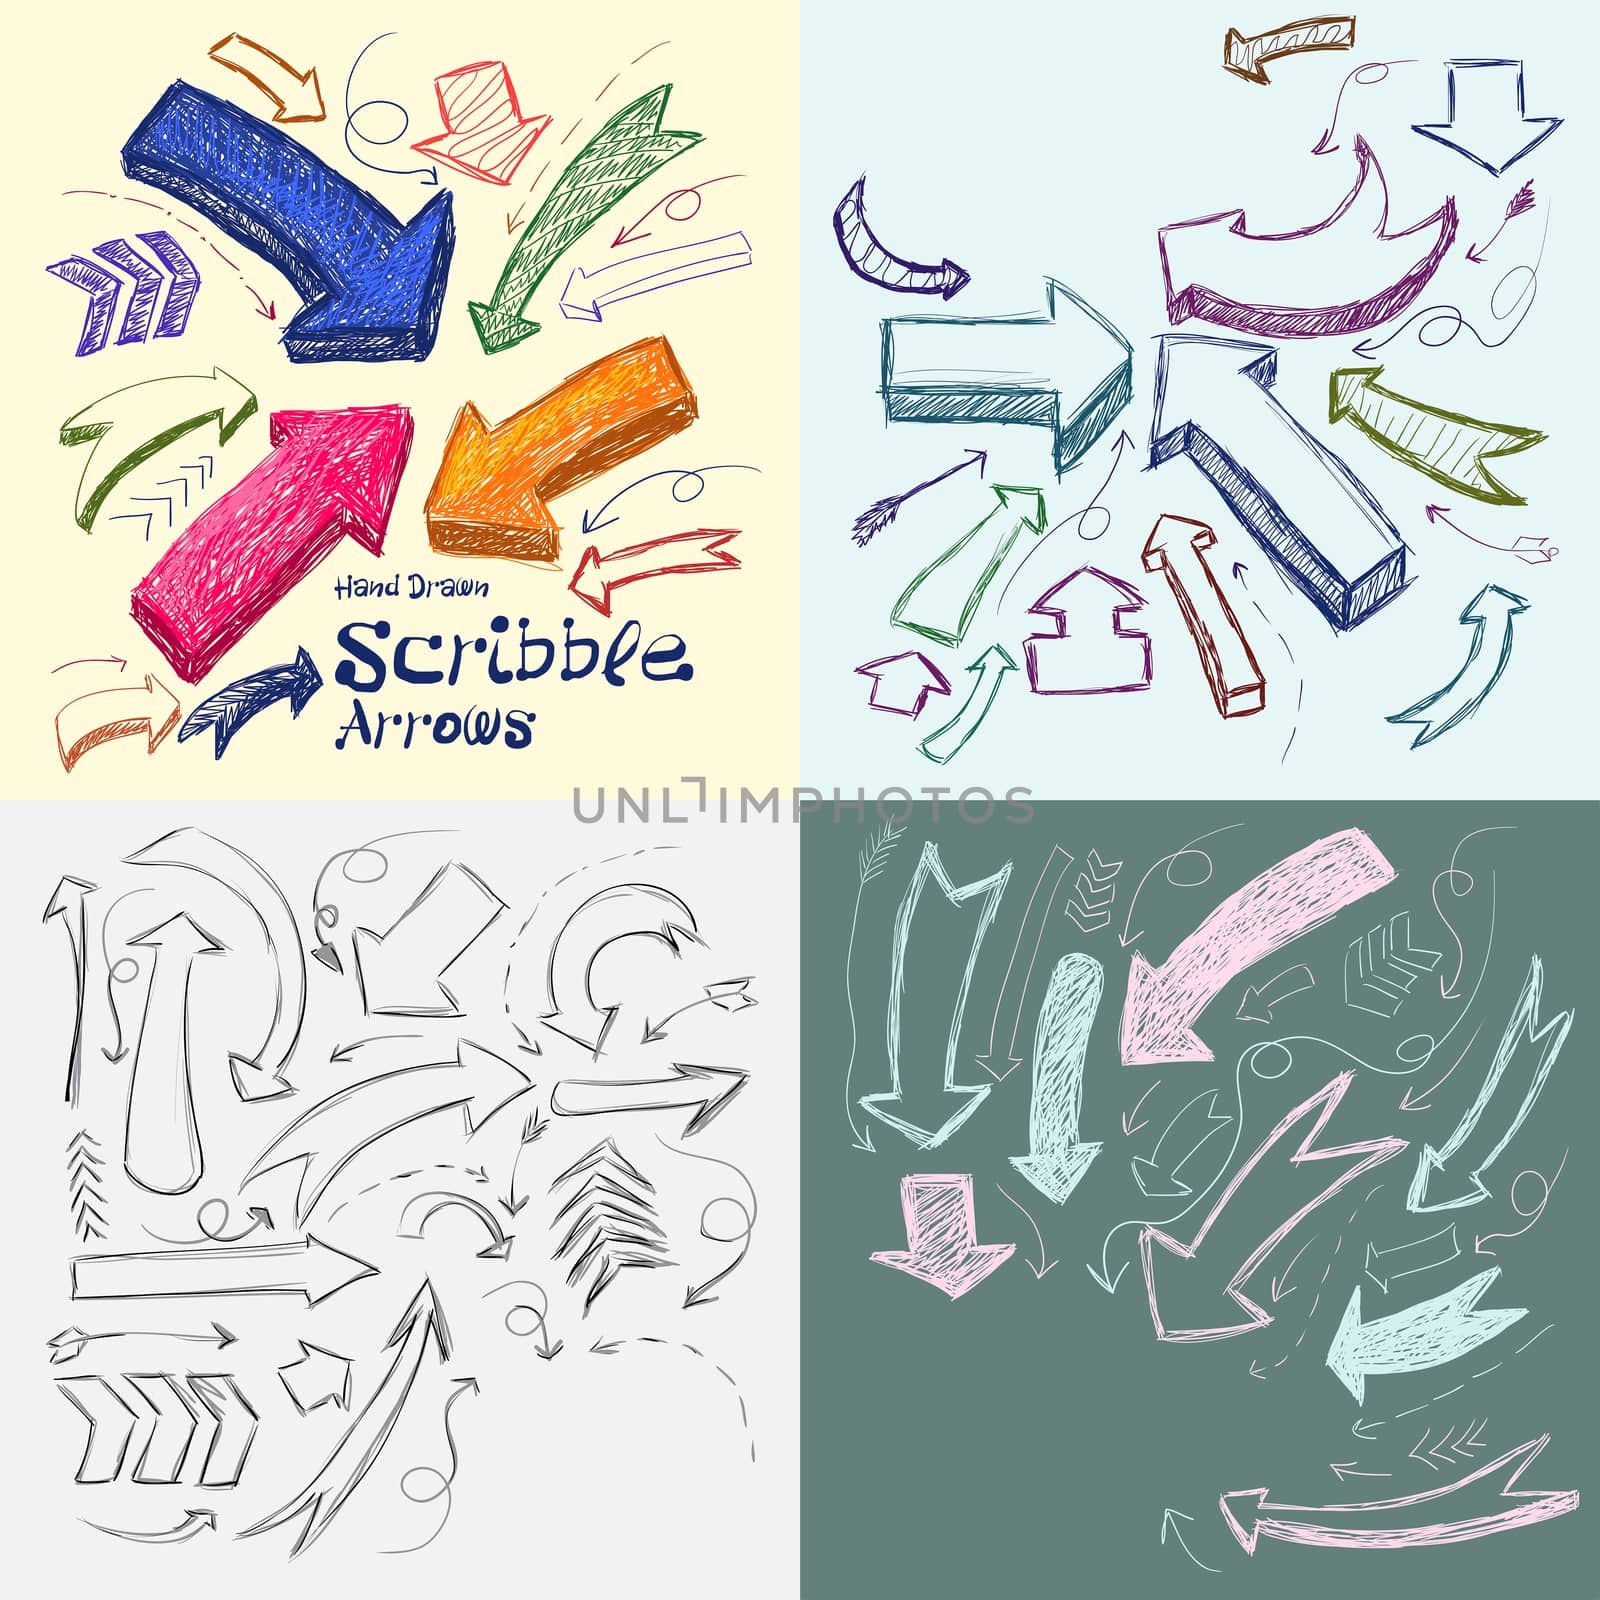 Set of scribble arrows hand-drawn on a light background. by Adamchuk